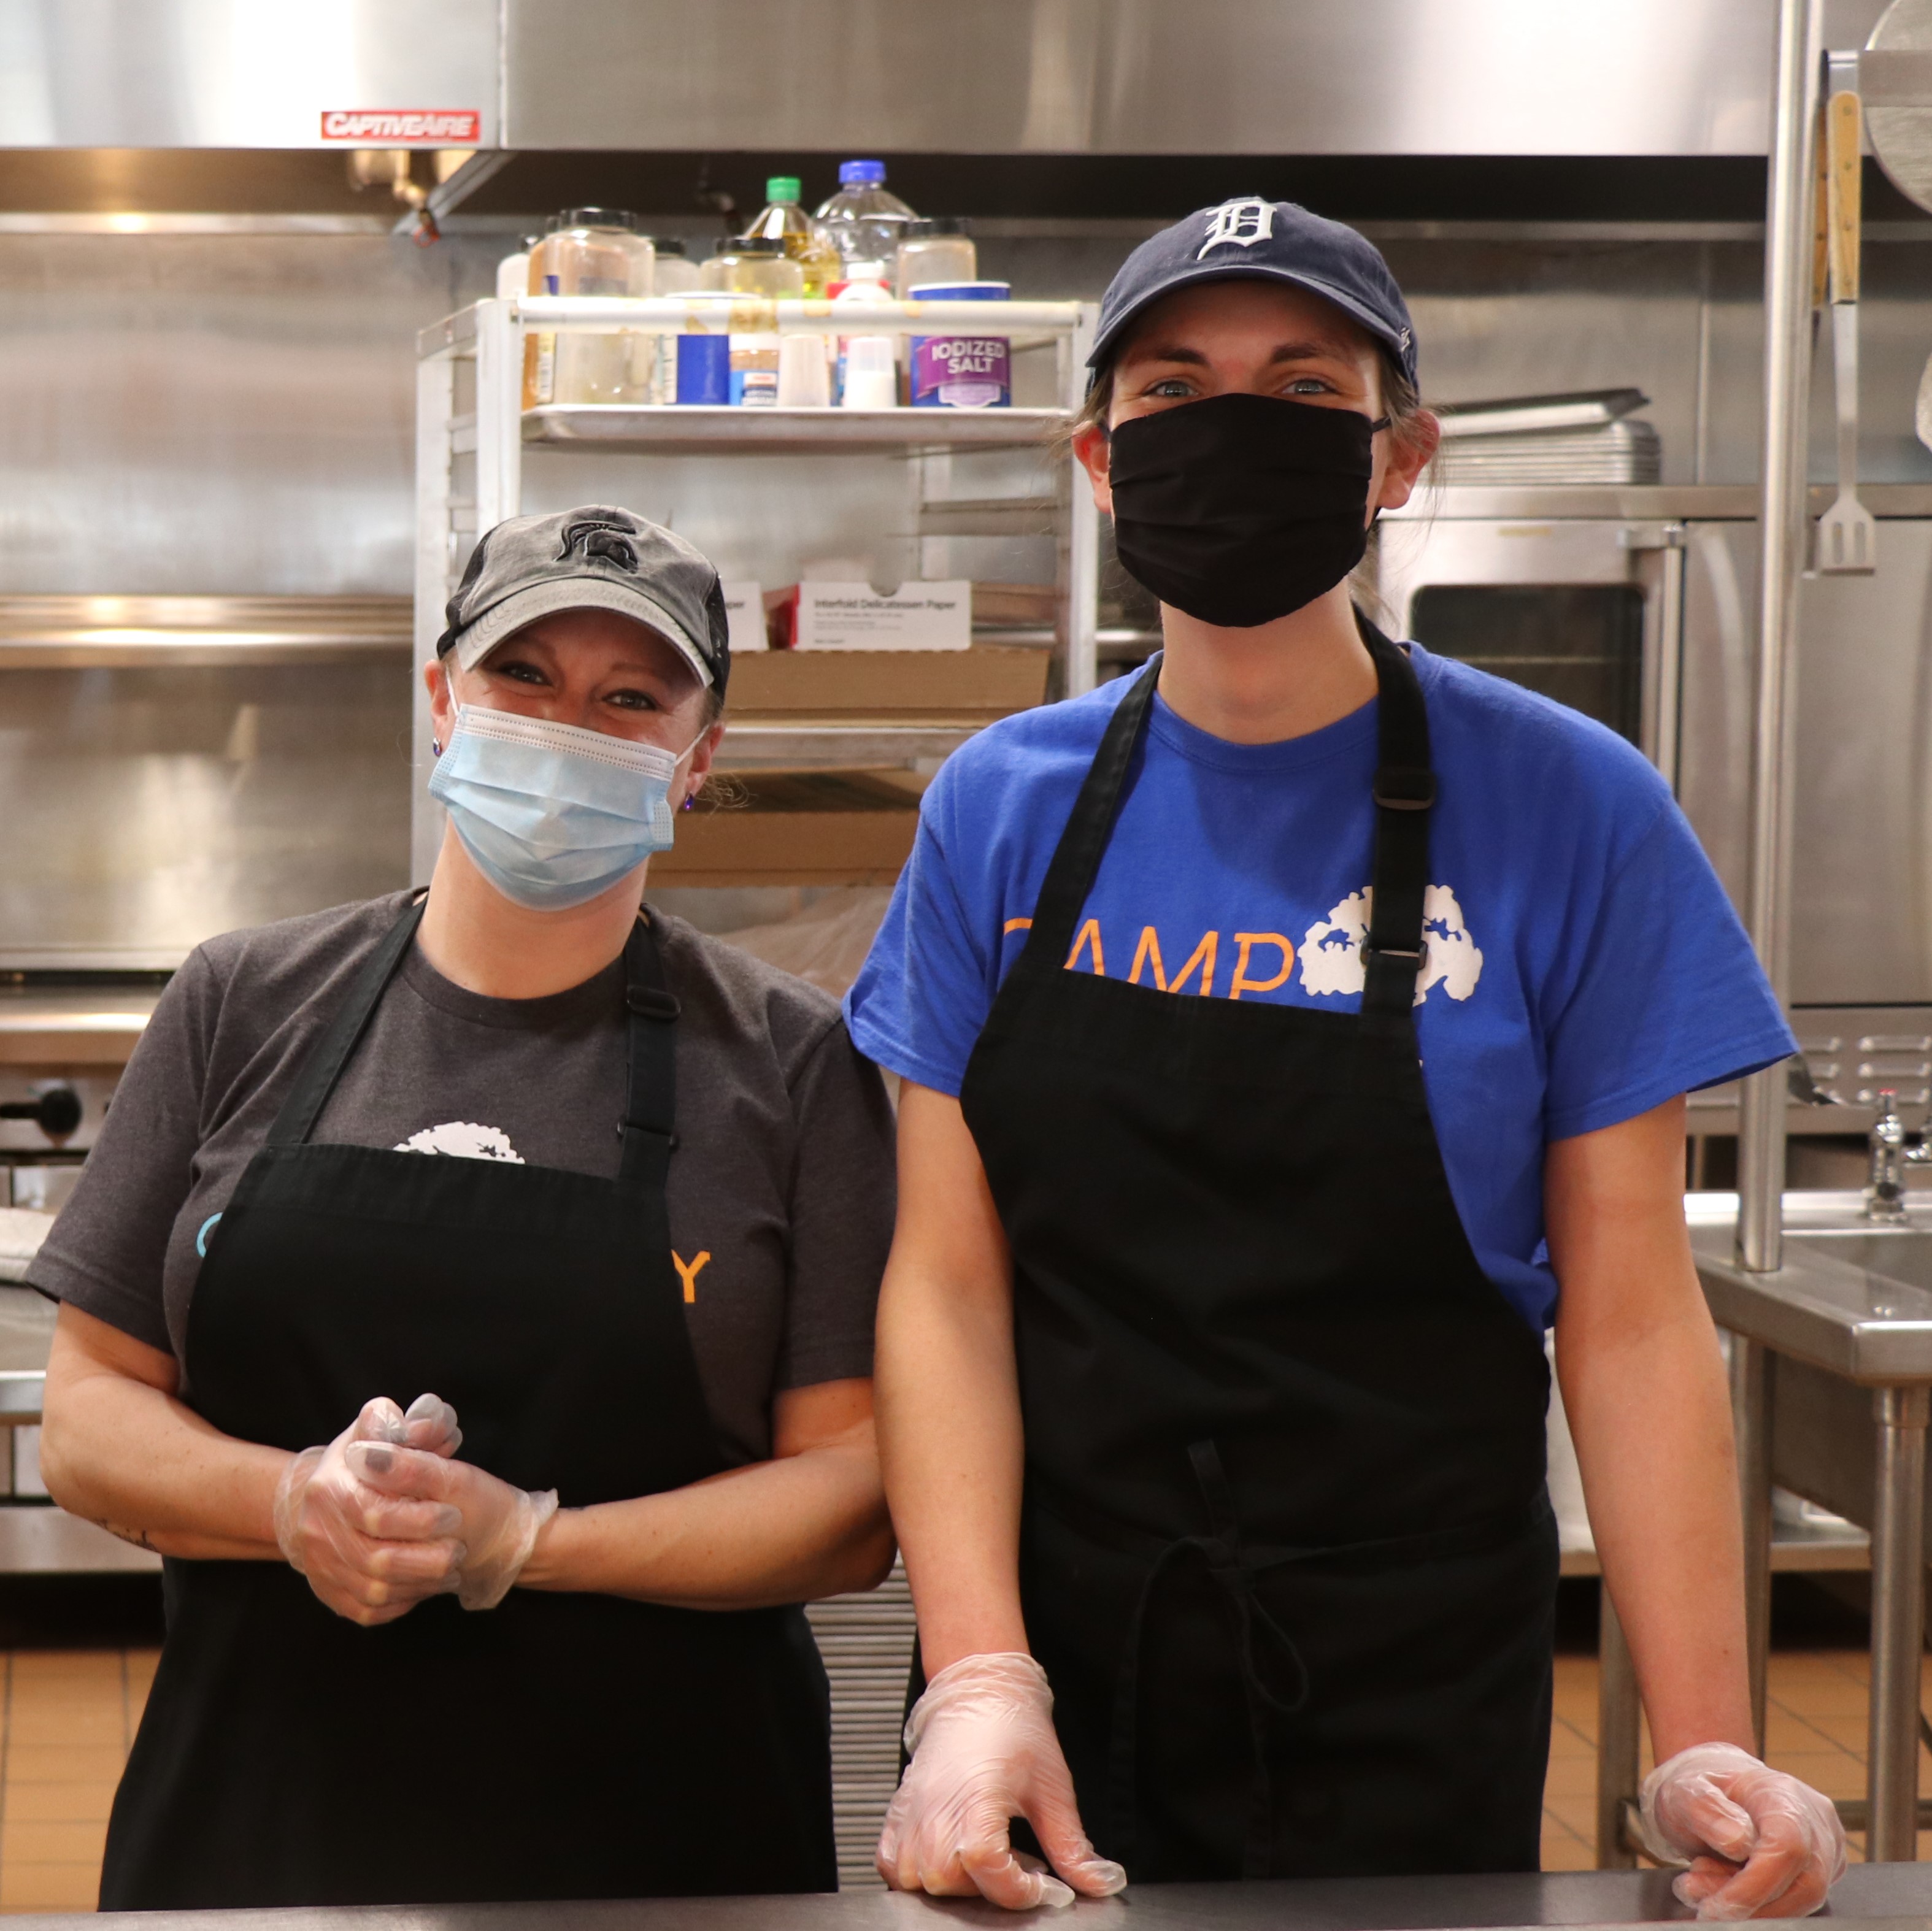 Our summer food service staff live on-site and are a vital part of the Camp Henry Summer Staff Team. Food Service Staff prepare and serve meals, care for the Dining Hall, and assist with cleaning.